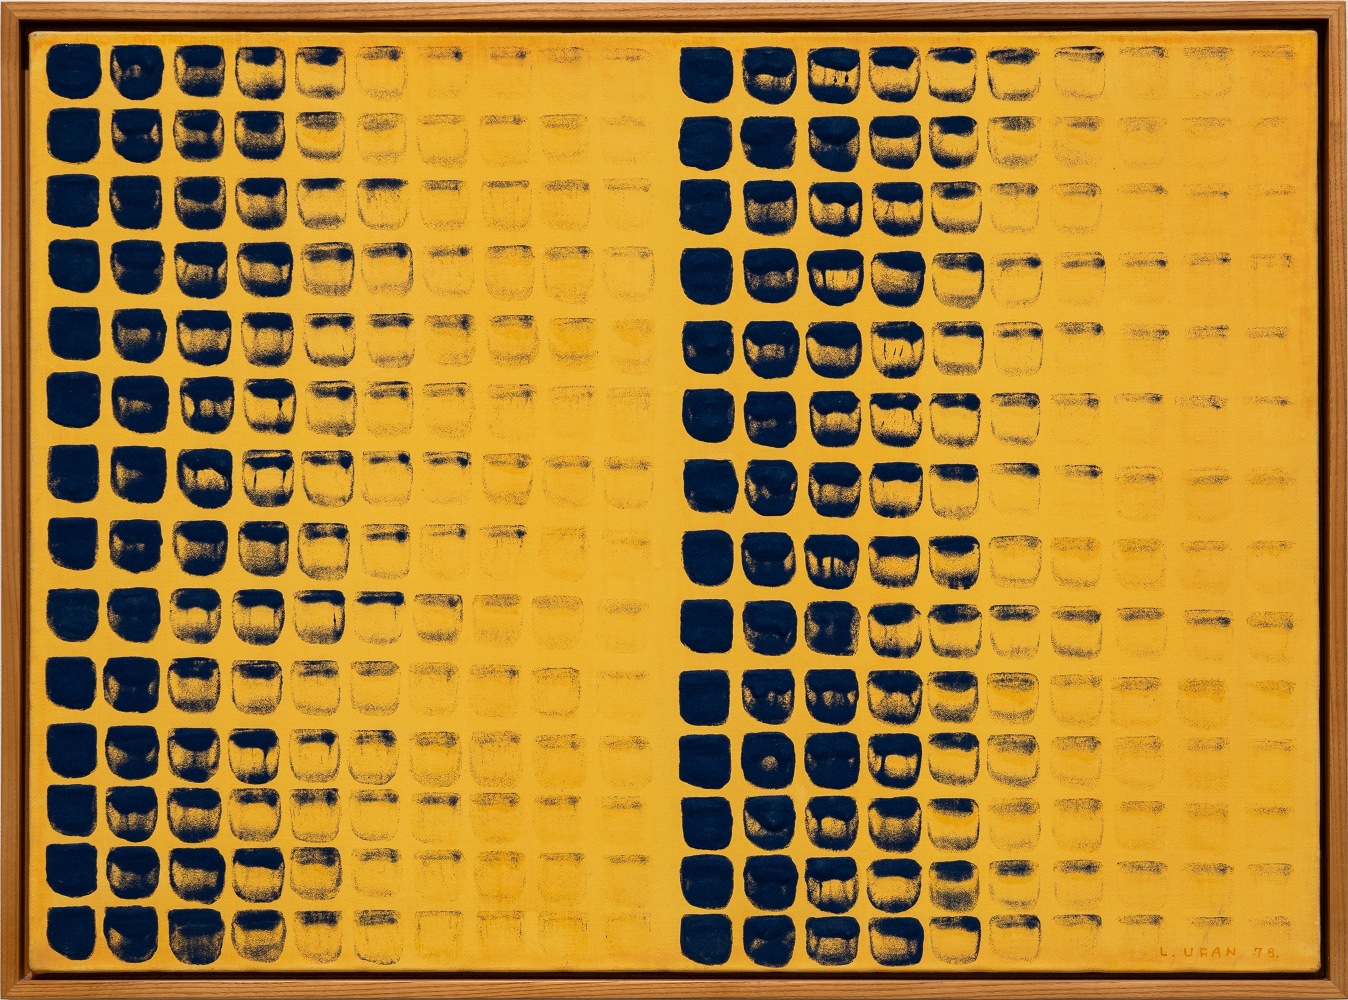 Lee Ufan (b. 1936)

From Point (No. 78097), 1978

Oil on canvas

20.87 x 28.74 inches

53 x 73 cm